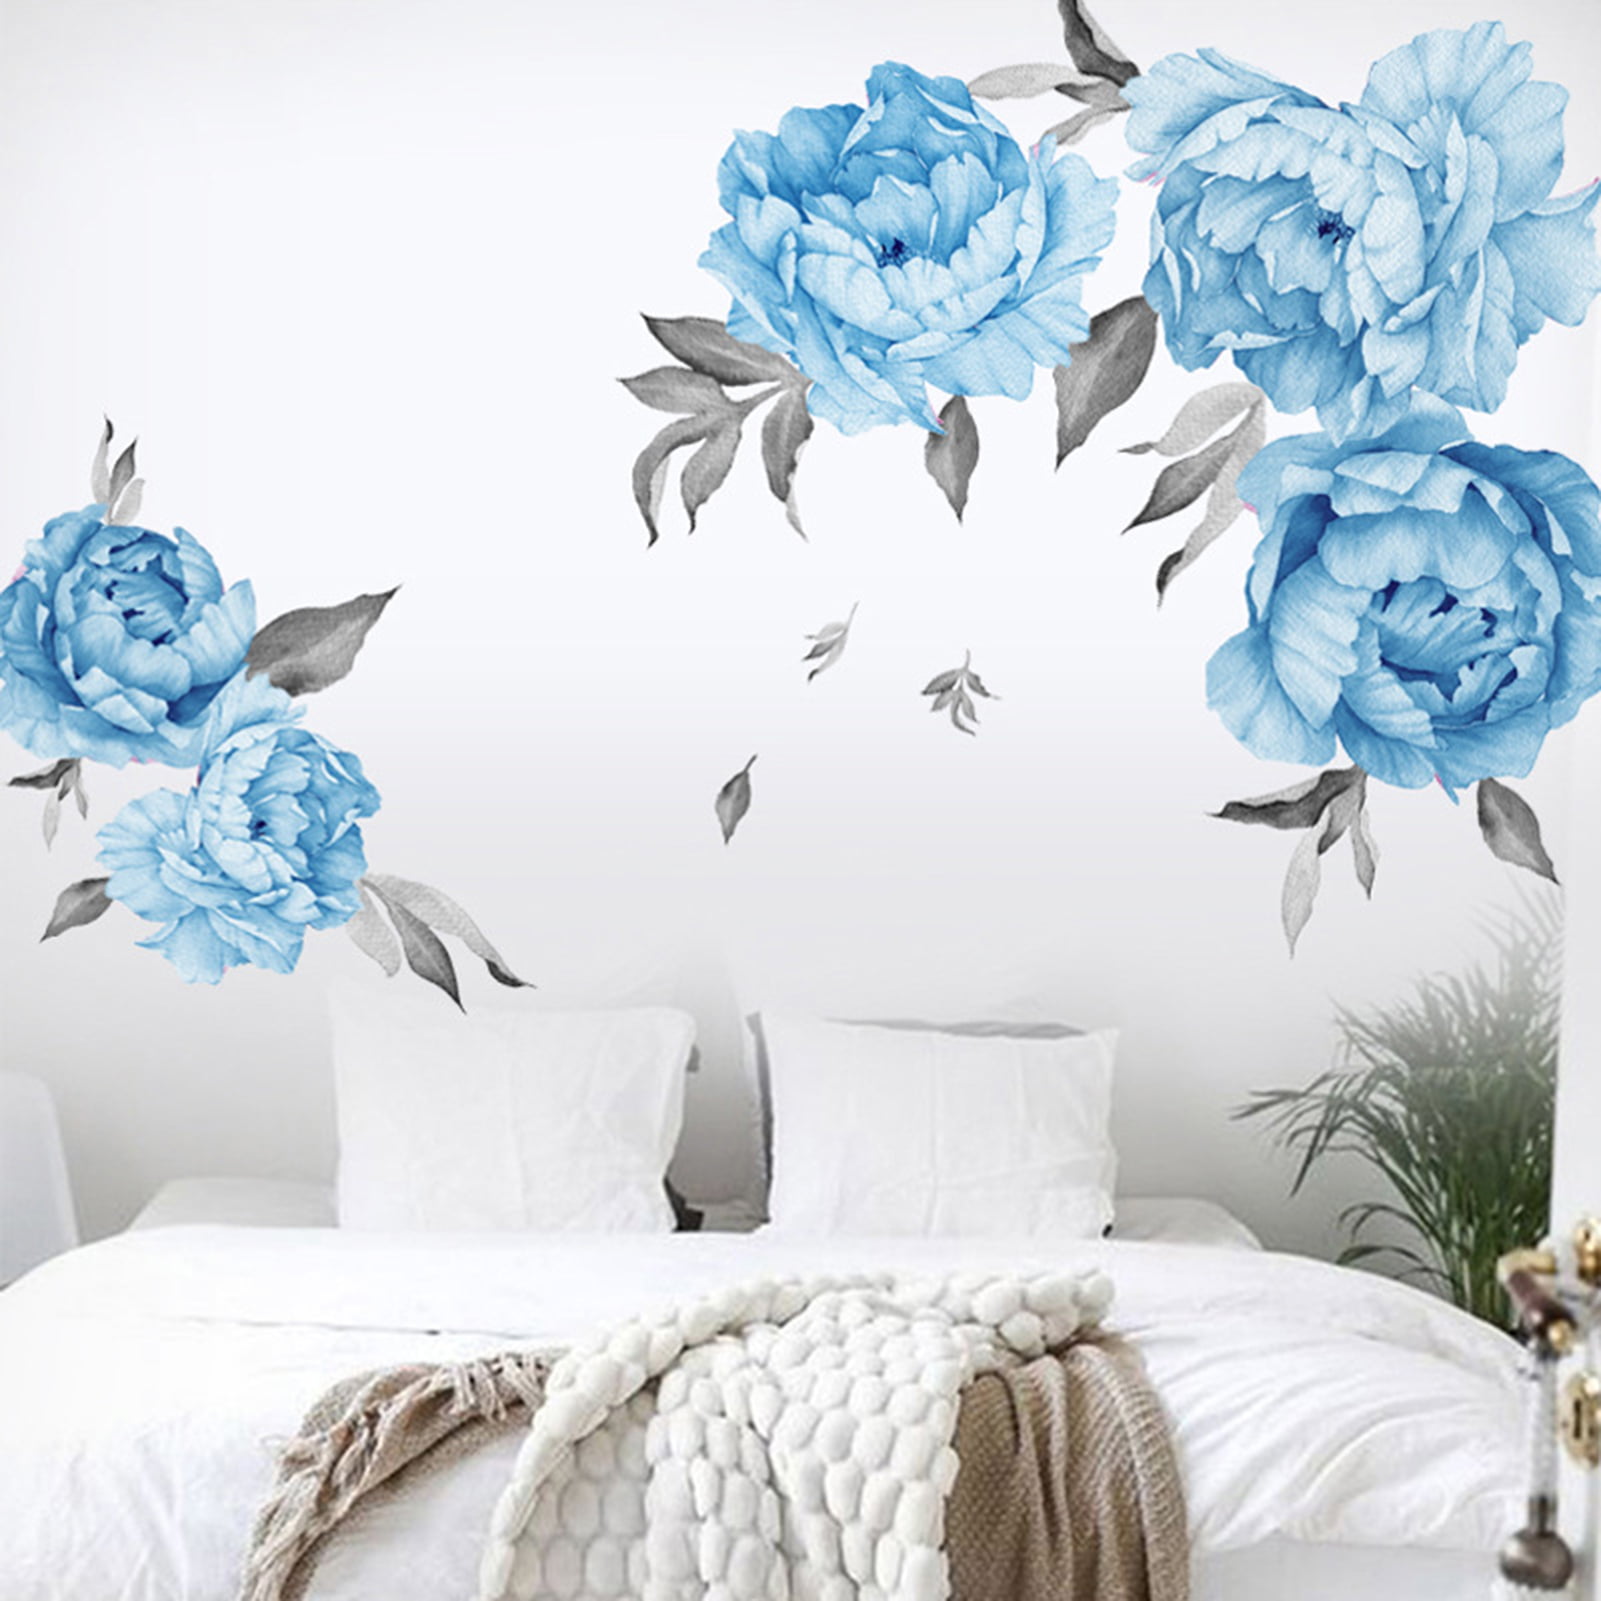 Details about   Peony Flower Art Wall Sticker Living Room Home Background DIY Decal Removable 